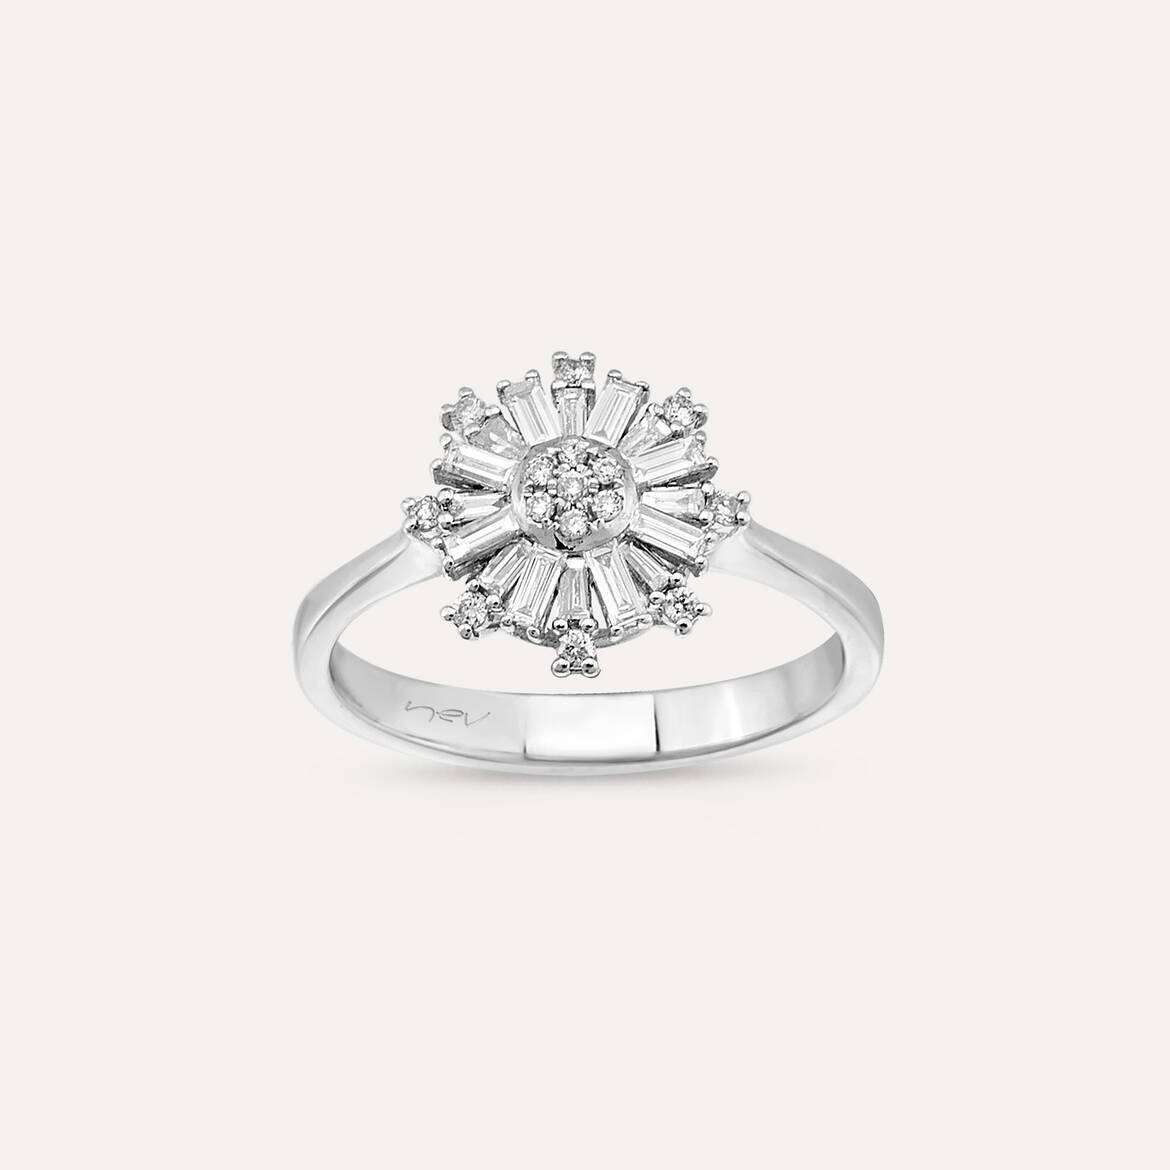 0.37 CT Baguette and Trapeze Cut Diamond White Gold Ring